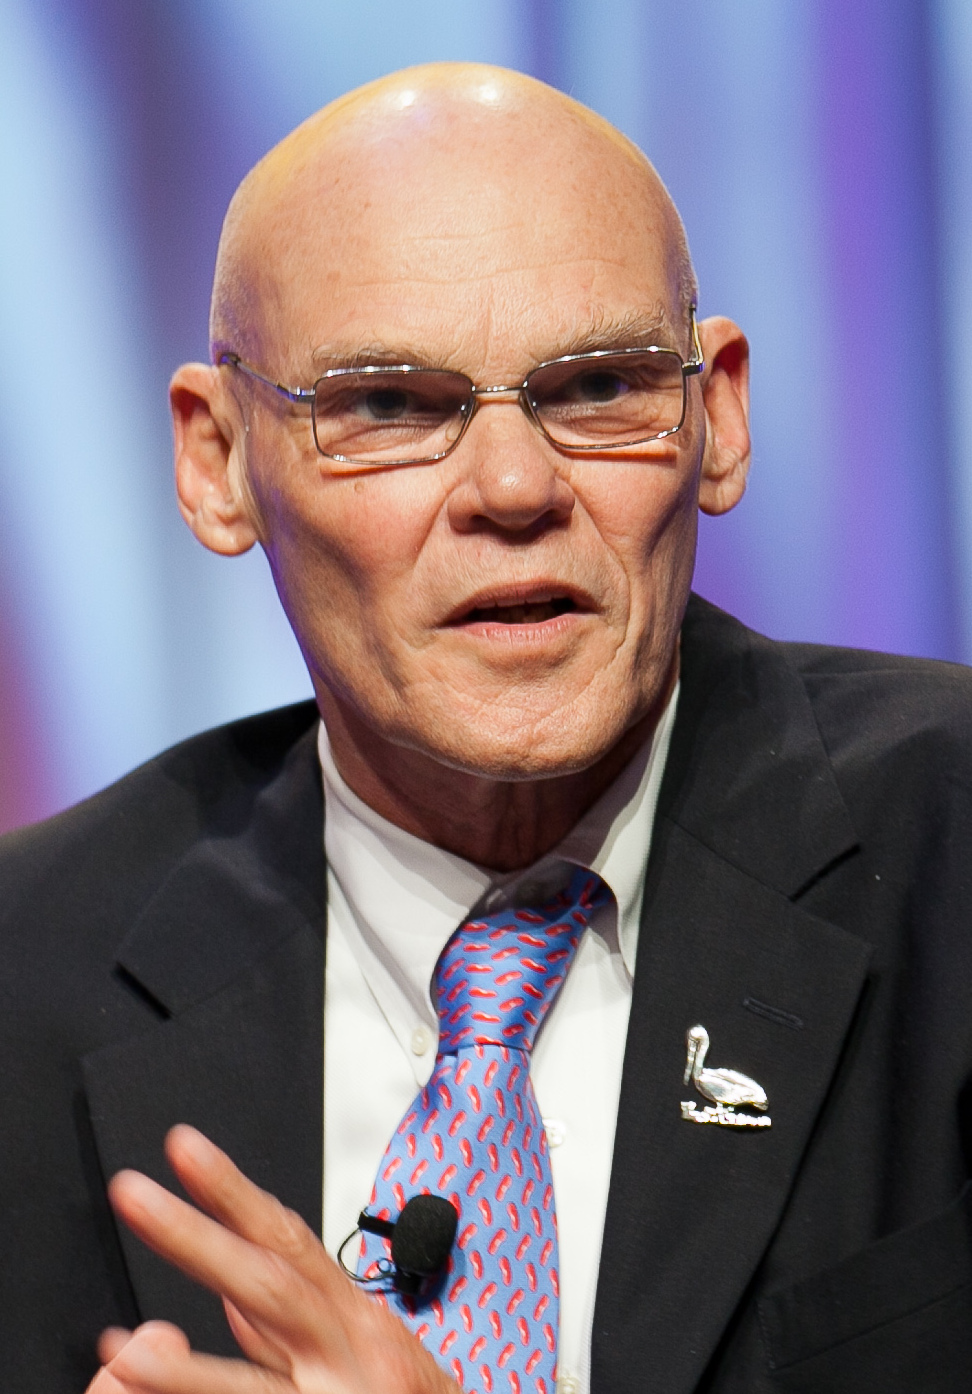 Picture of James Carville